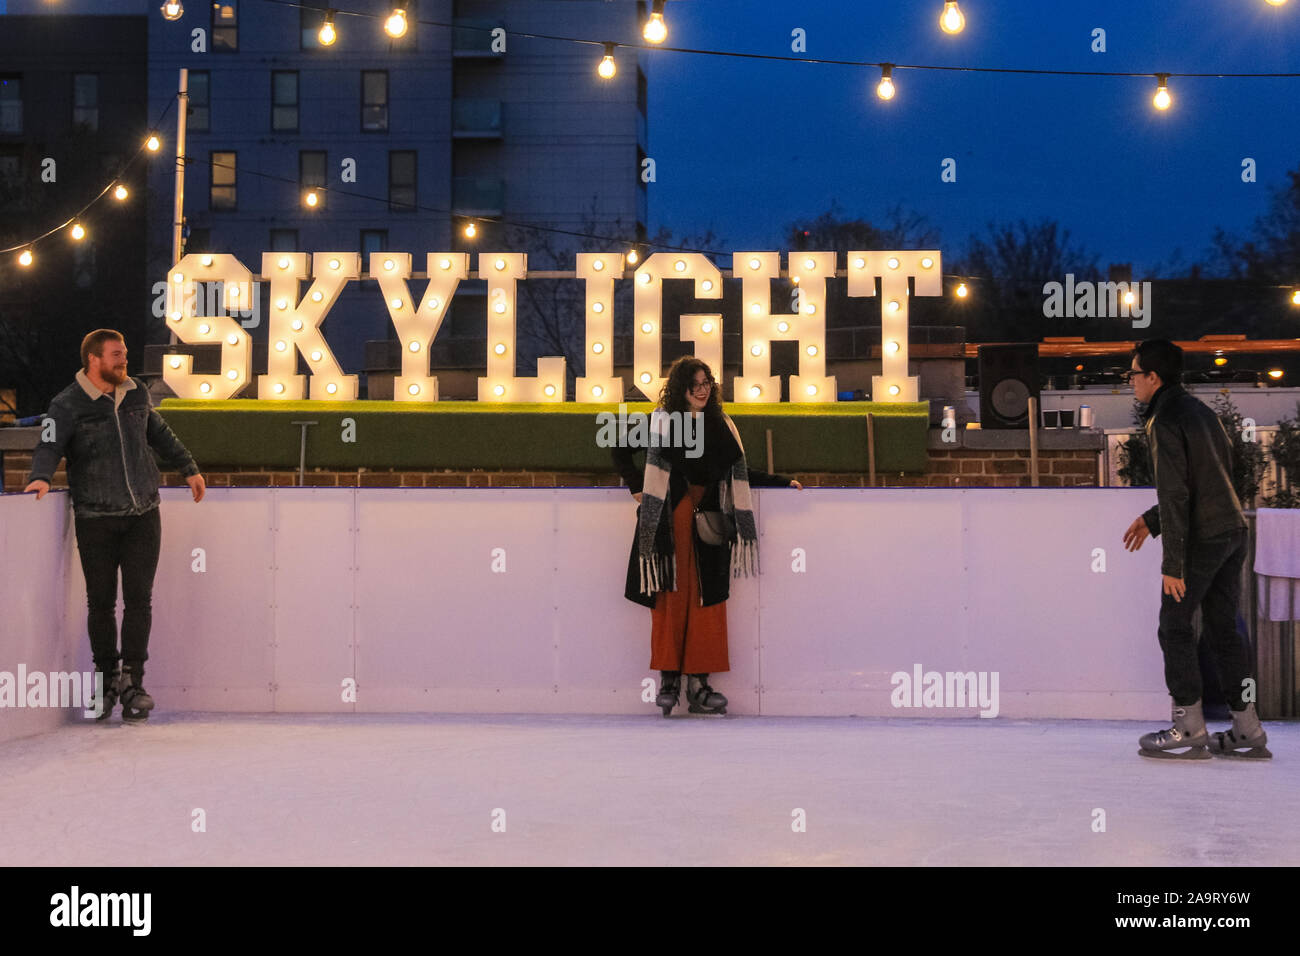 Tobacco Dock, London, UK, 17th November 2019. People enjoy spectacular views across to the City of London at London's trendy Skylight ice rink, a rooftop at the historic Tobacco Dock complex in Wapping, East London. Credit: Imageplotter/Alamy Live News Stock Photo